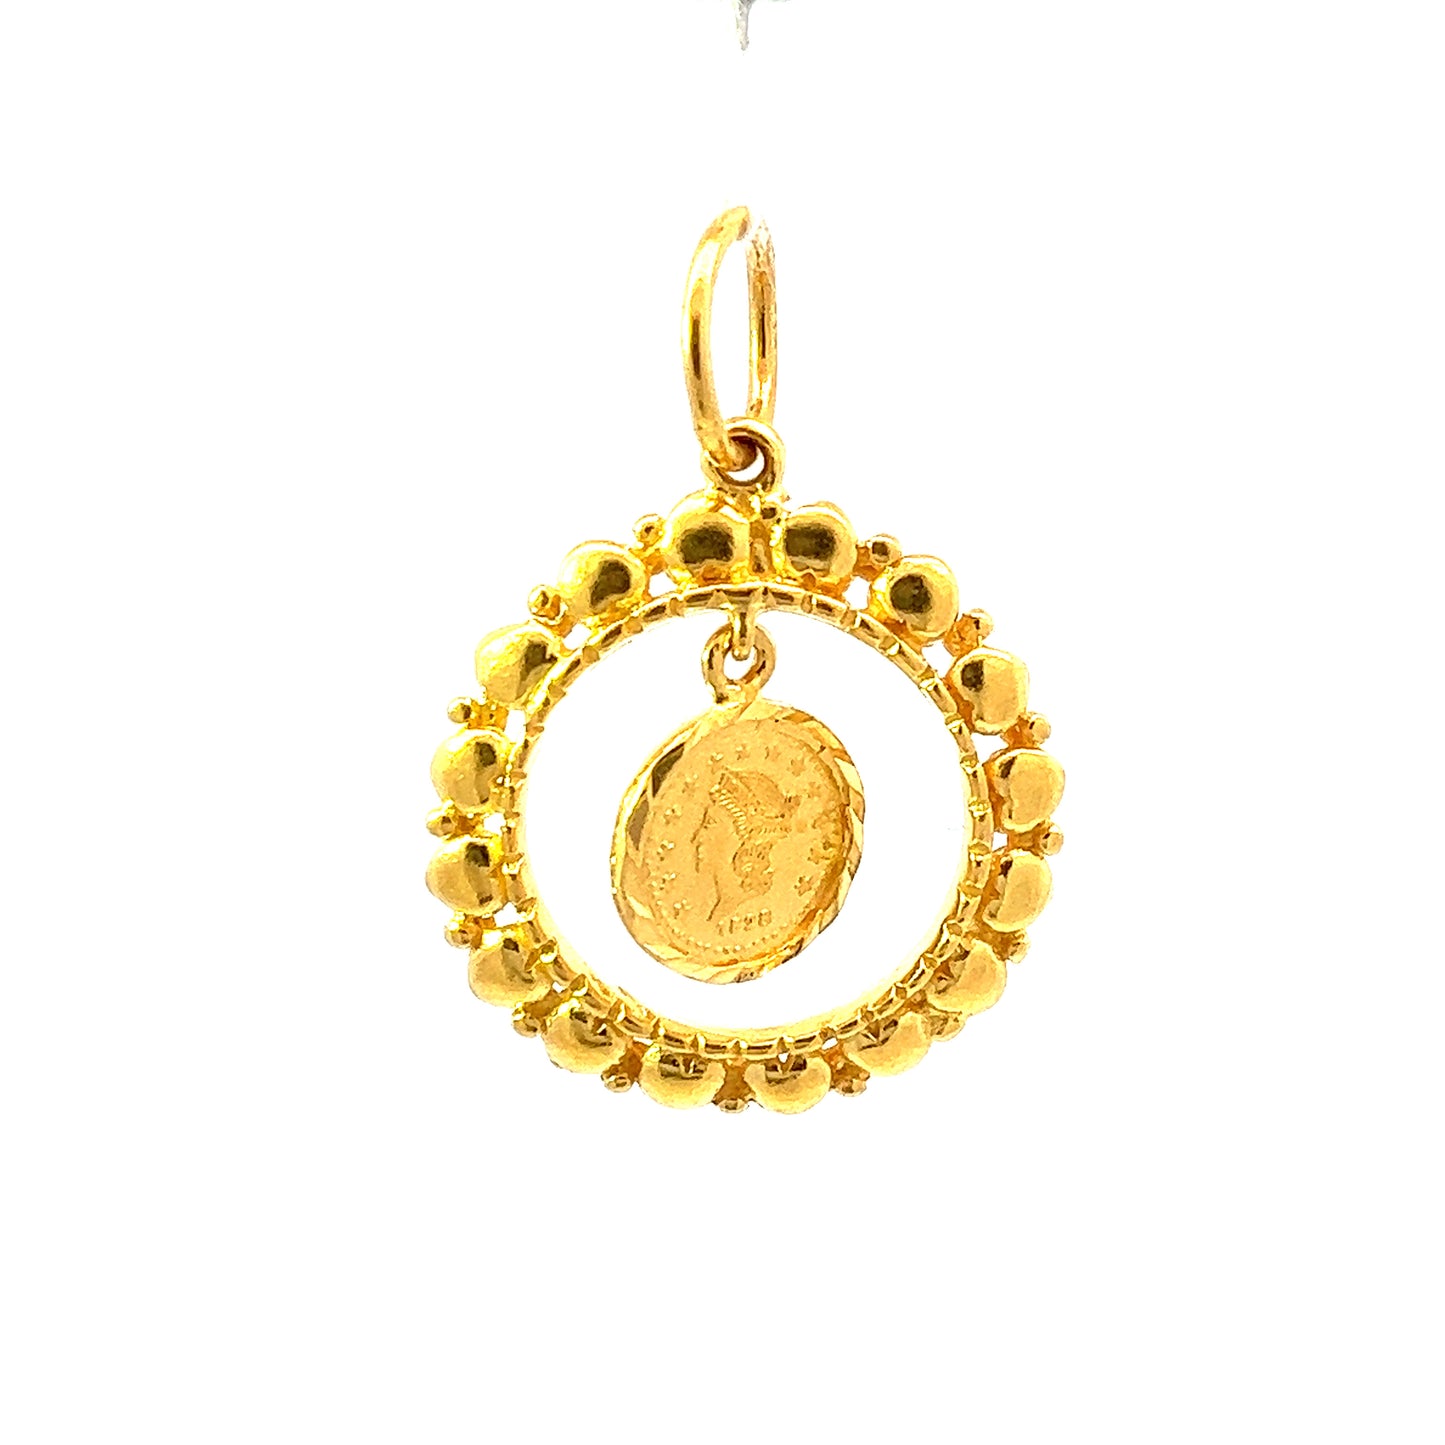 GOLD PENDANT ( 22K ) ( 3.41g ) - 0015193 Chain sold separately